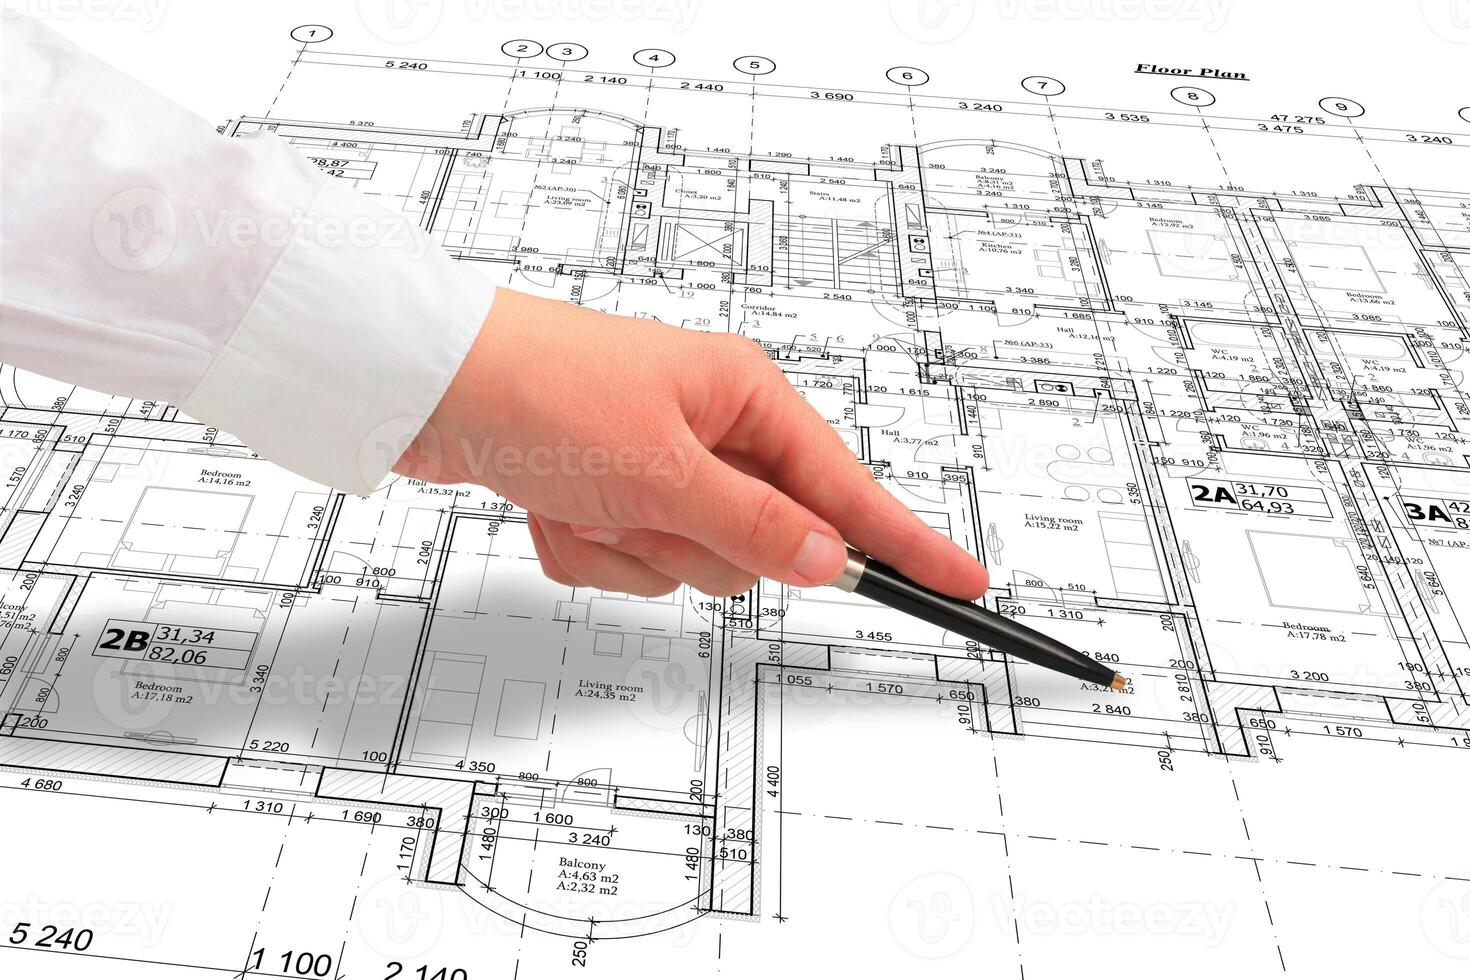 Woman architect in white shirt showing some details on the floor plan layout with a pen, close up of a hand photo